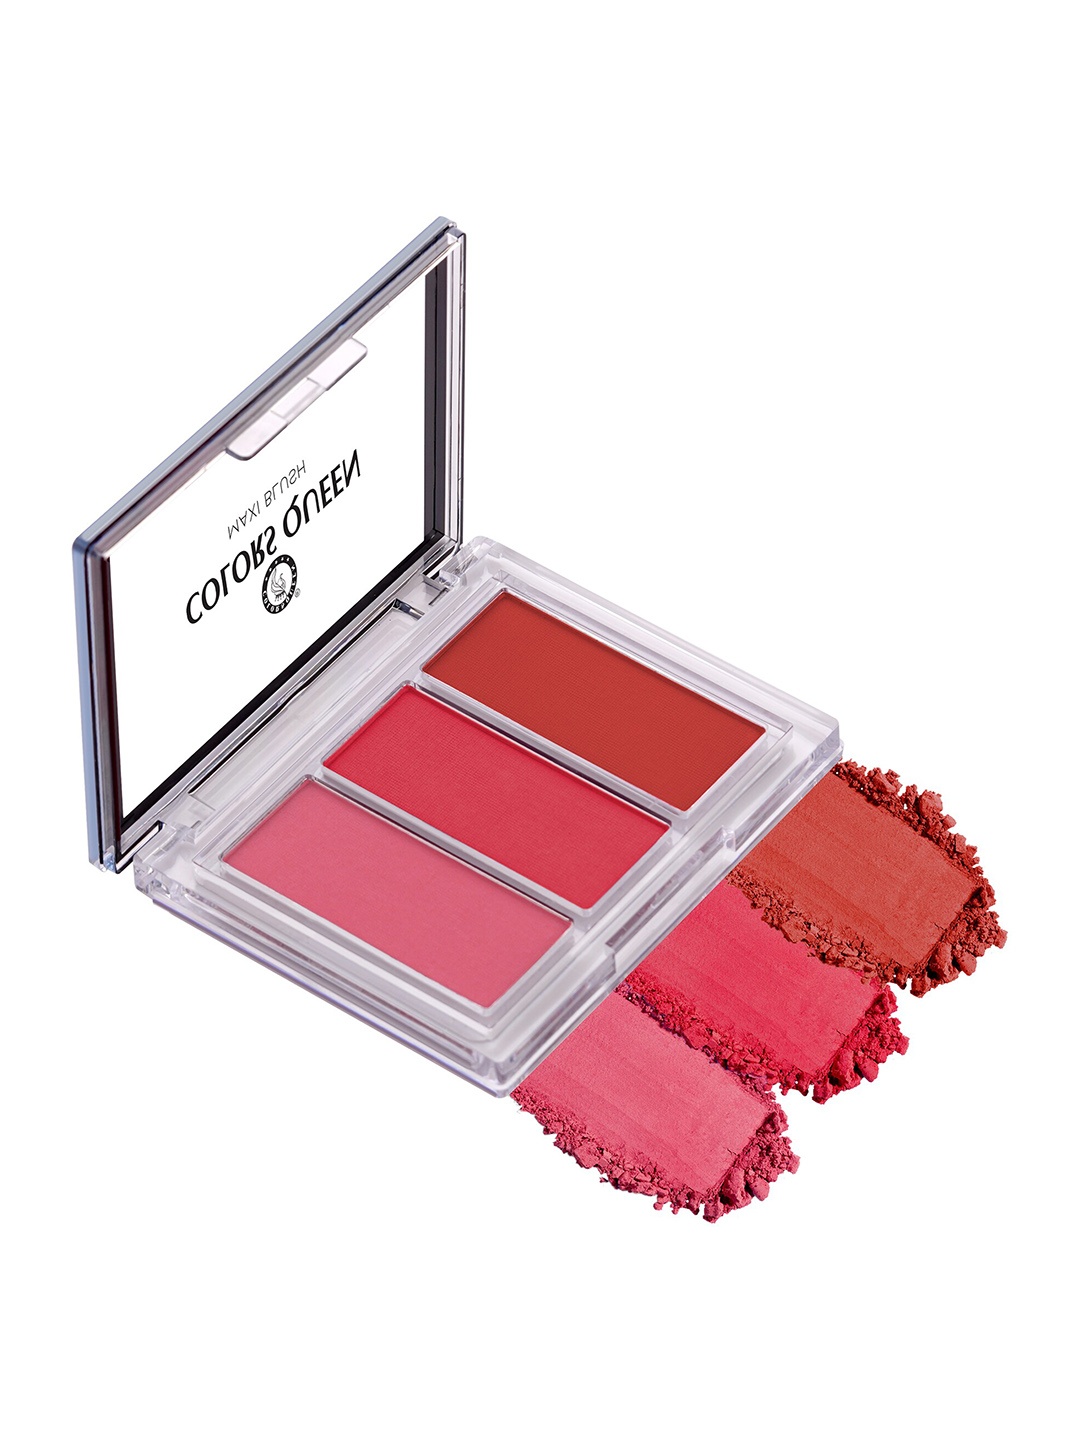 

Colors Queen Maxi Blush 3 Shade Long Lasting Matte Blusher Palette - Shade 04, Pink